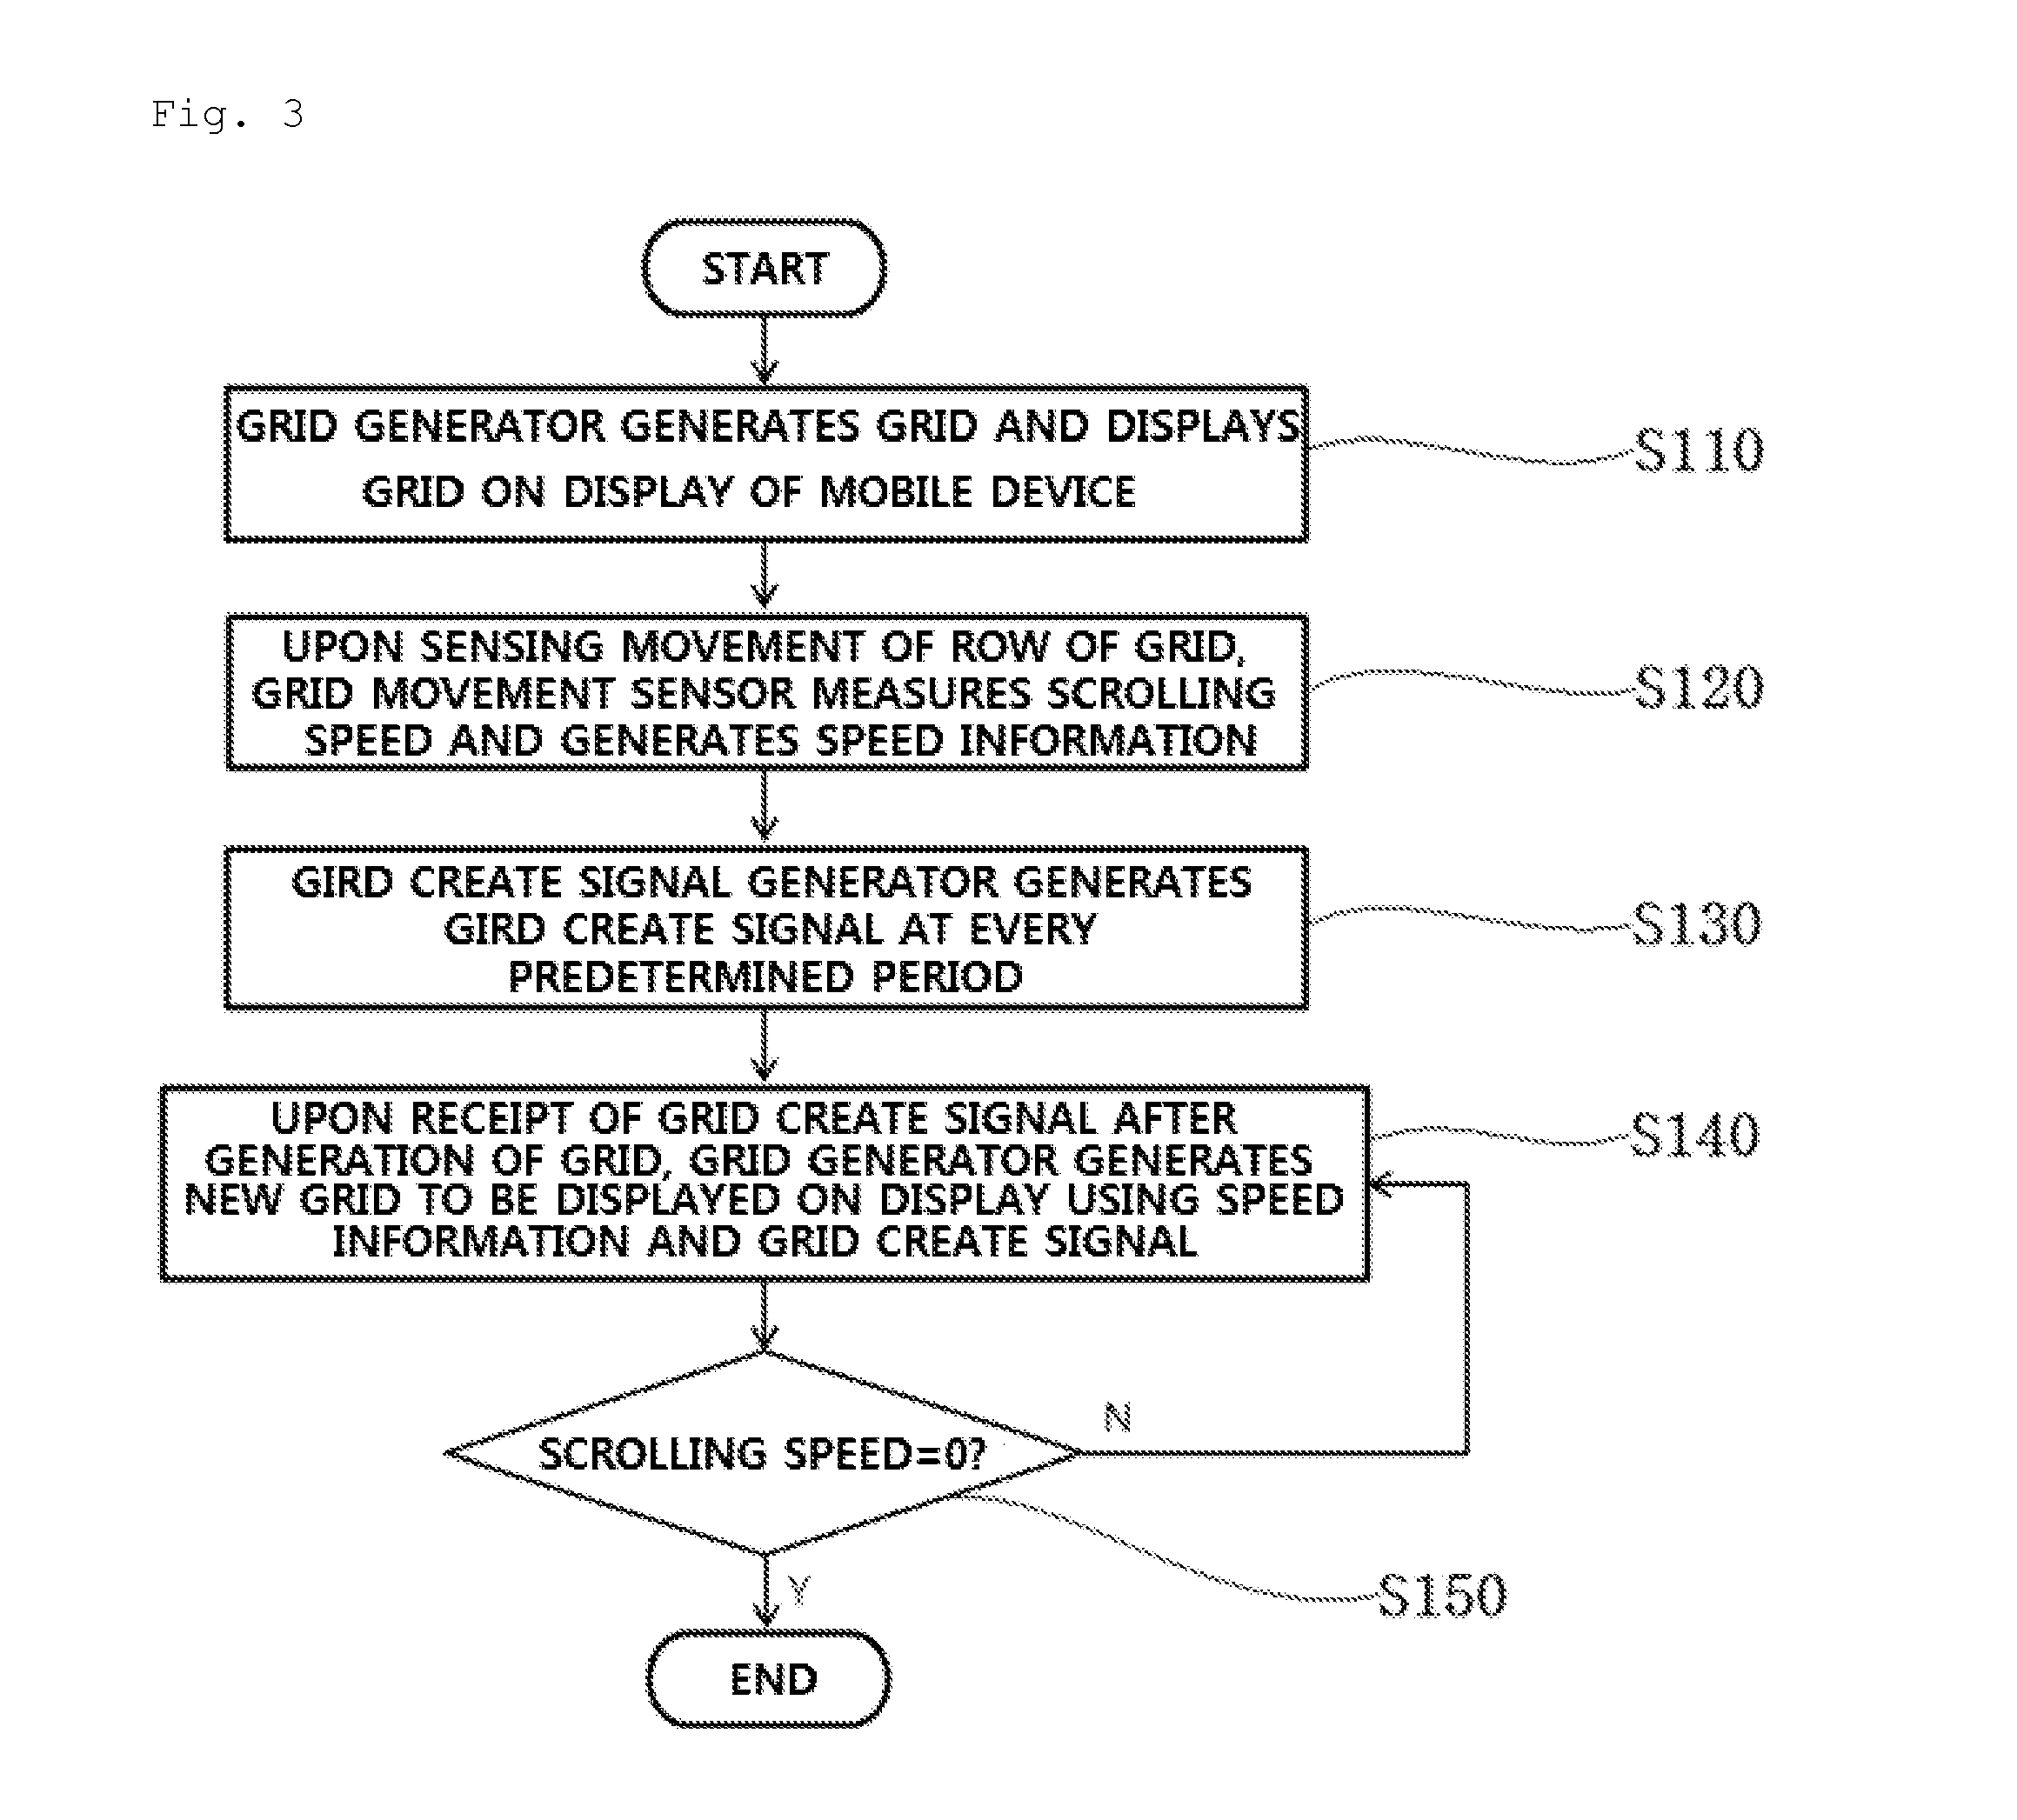 Apparatus for controlling grid output in a mobile device and method for controlling grid output using the same